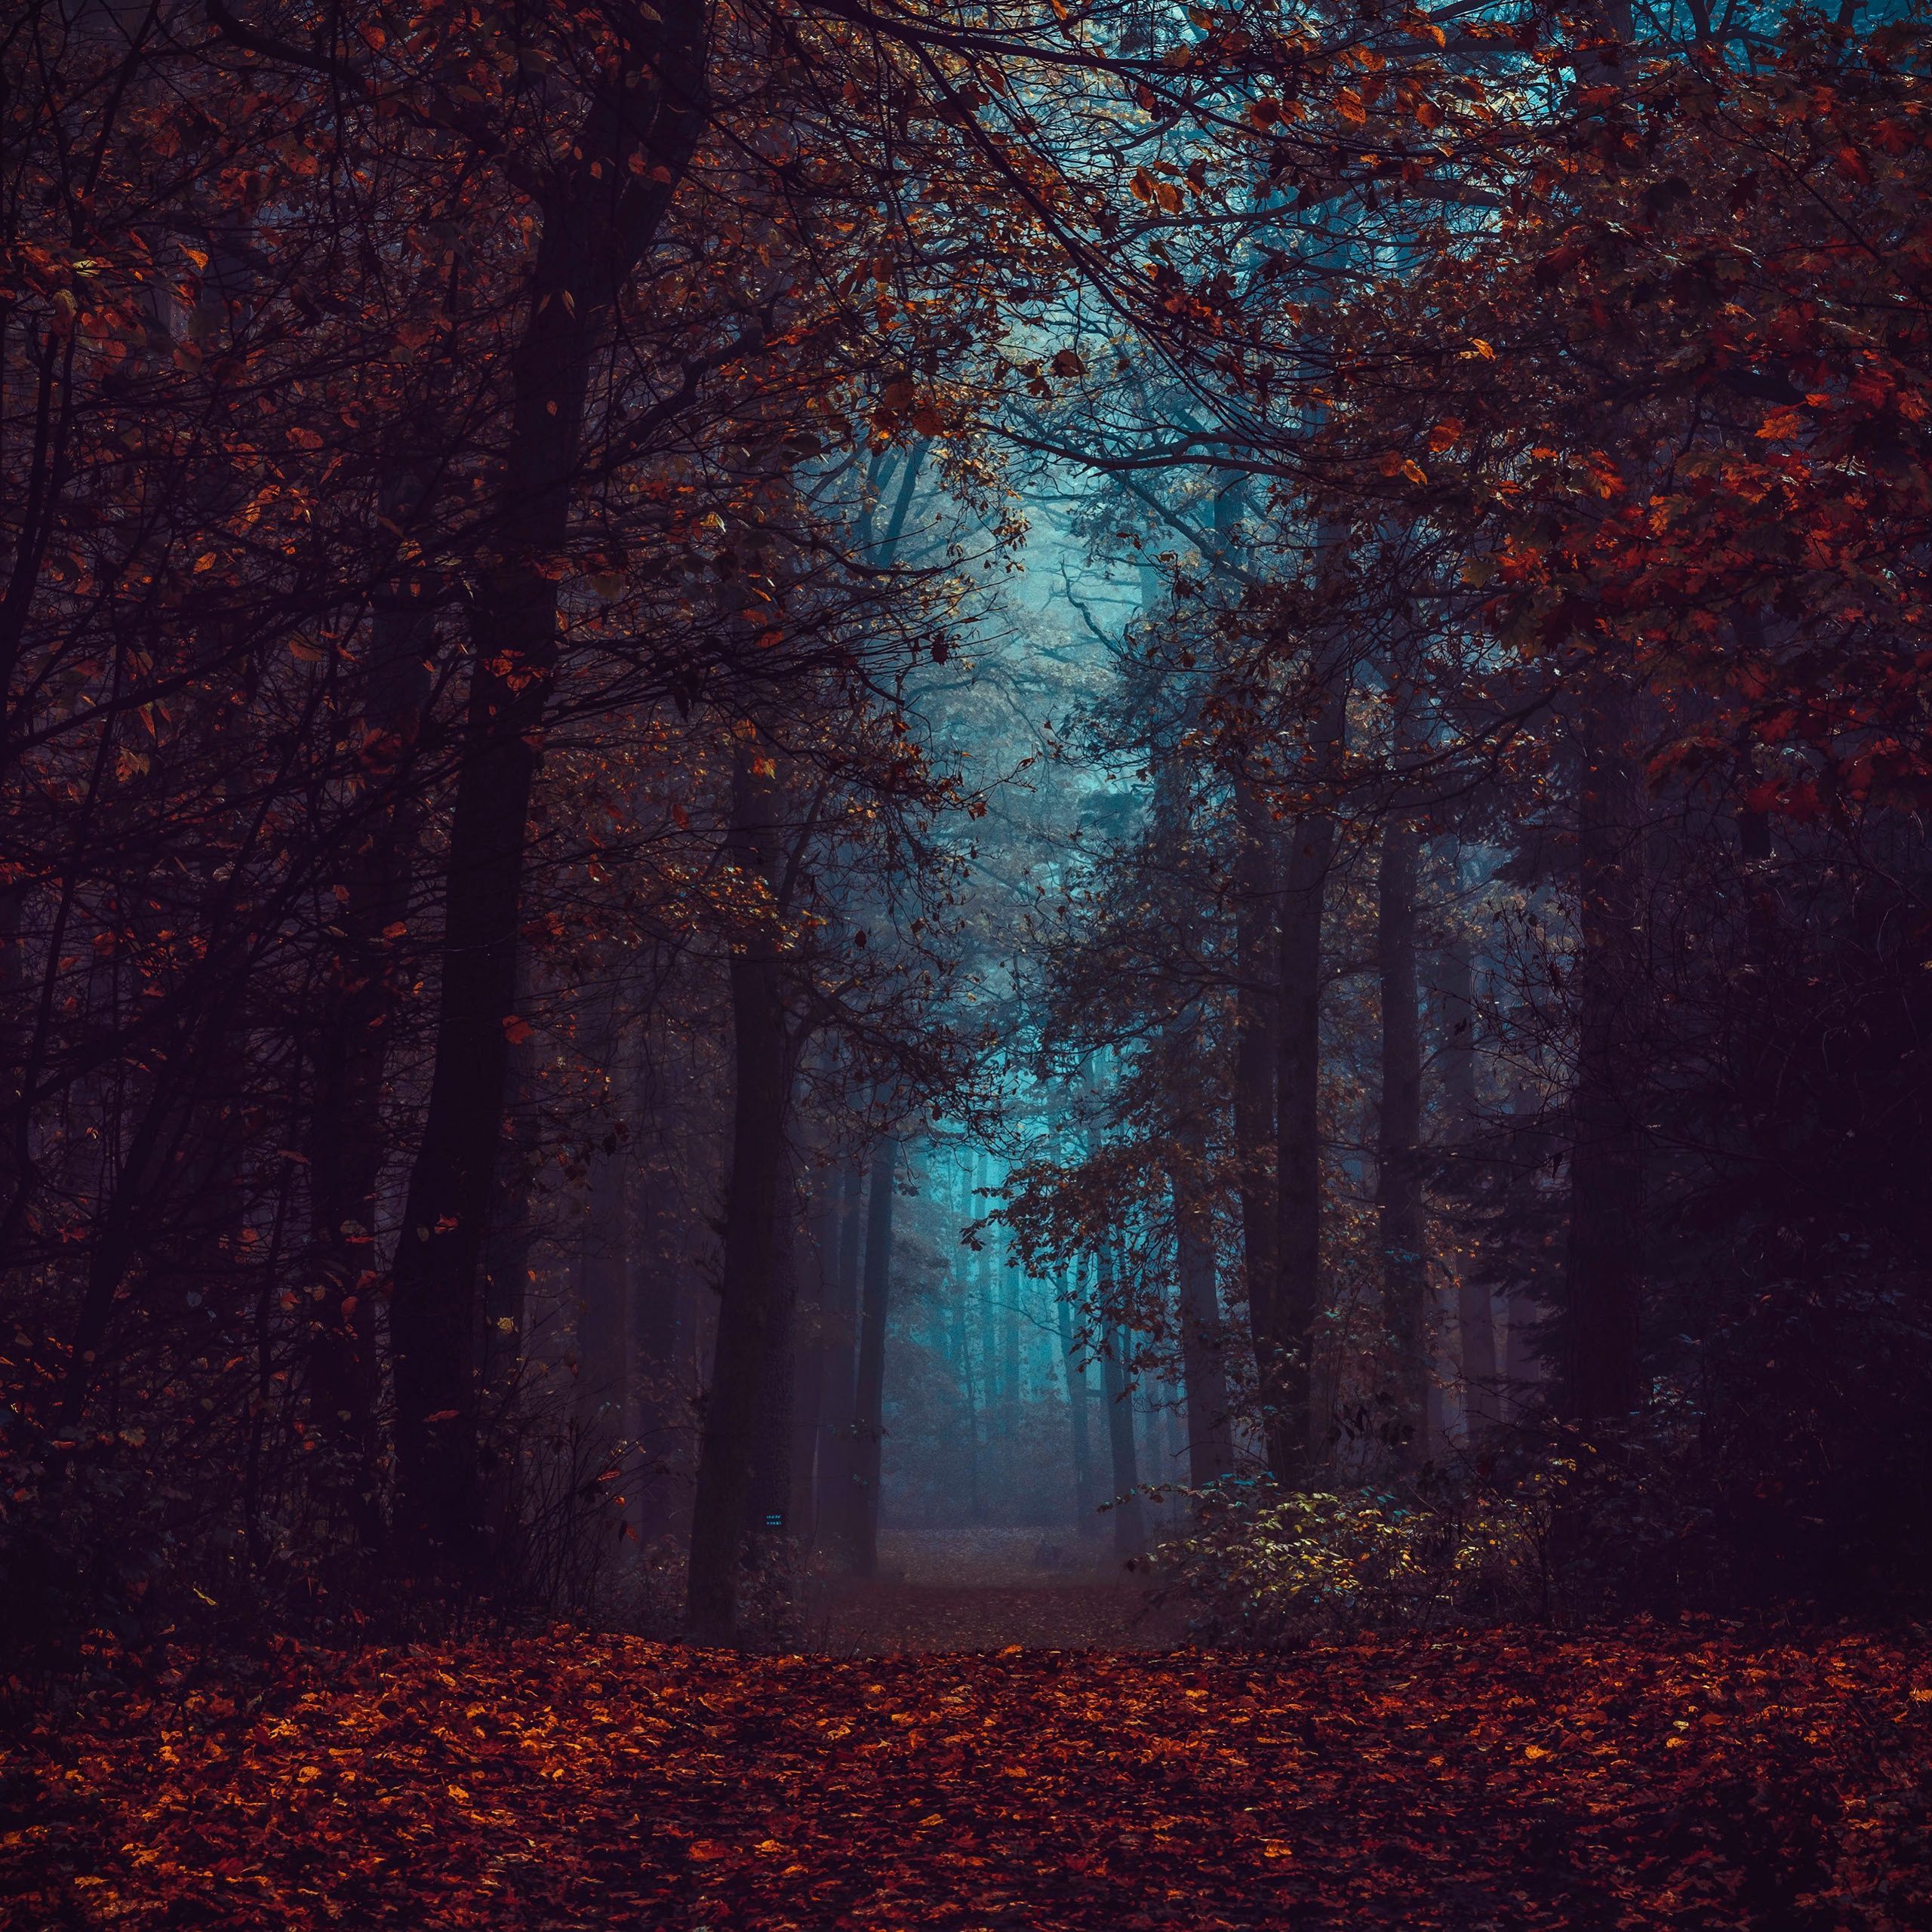 A foggy forest with trees and leaves on the ground - Fall, fog, forest, foggy forest